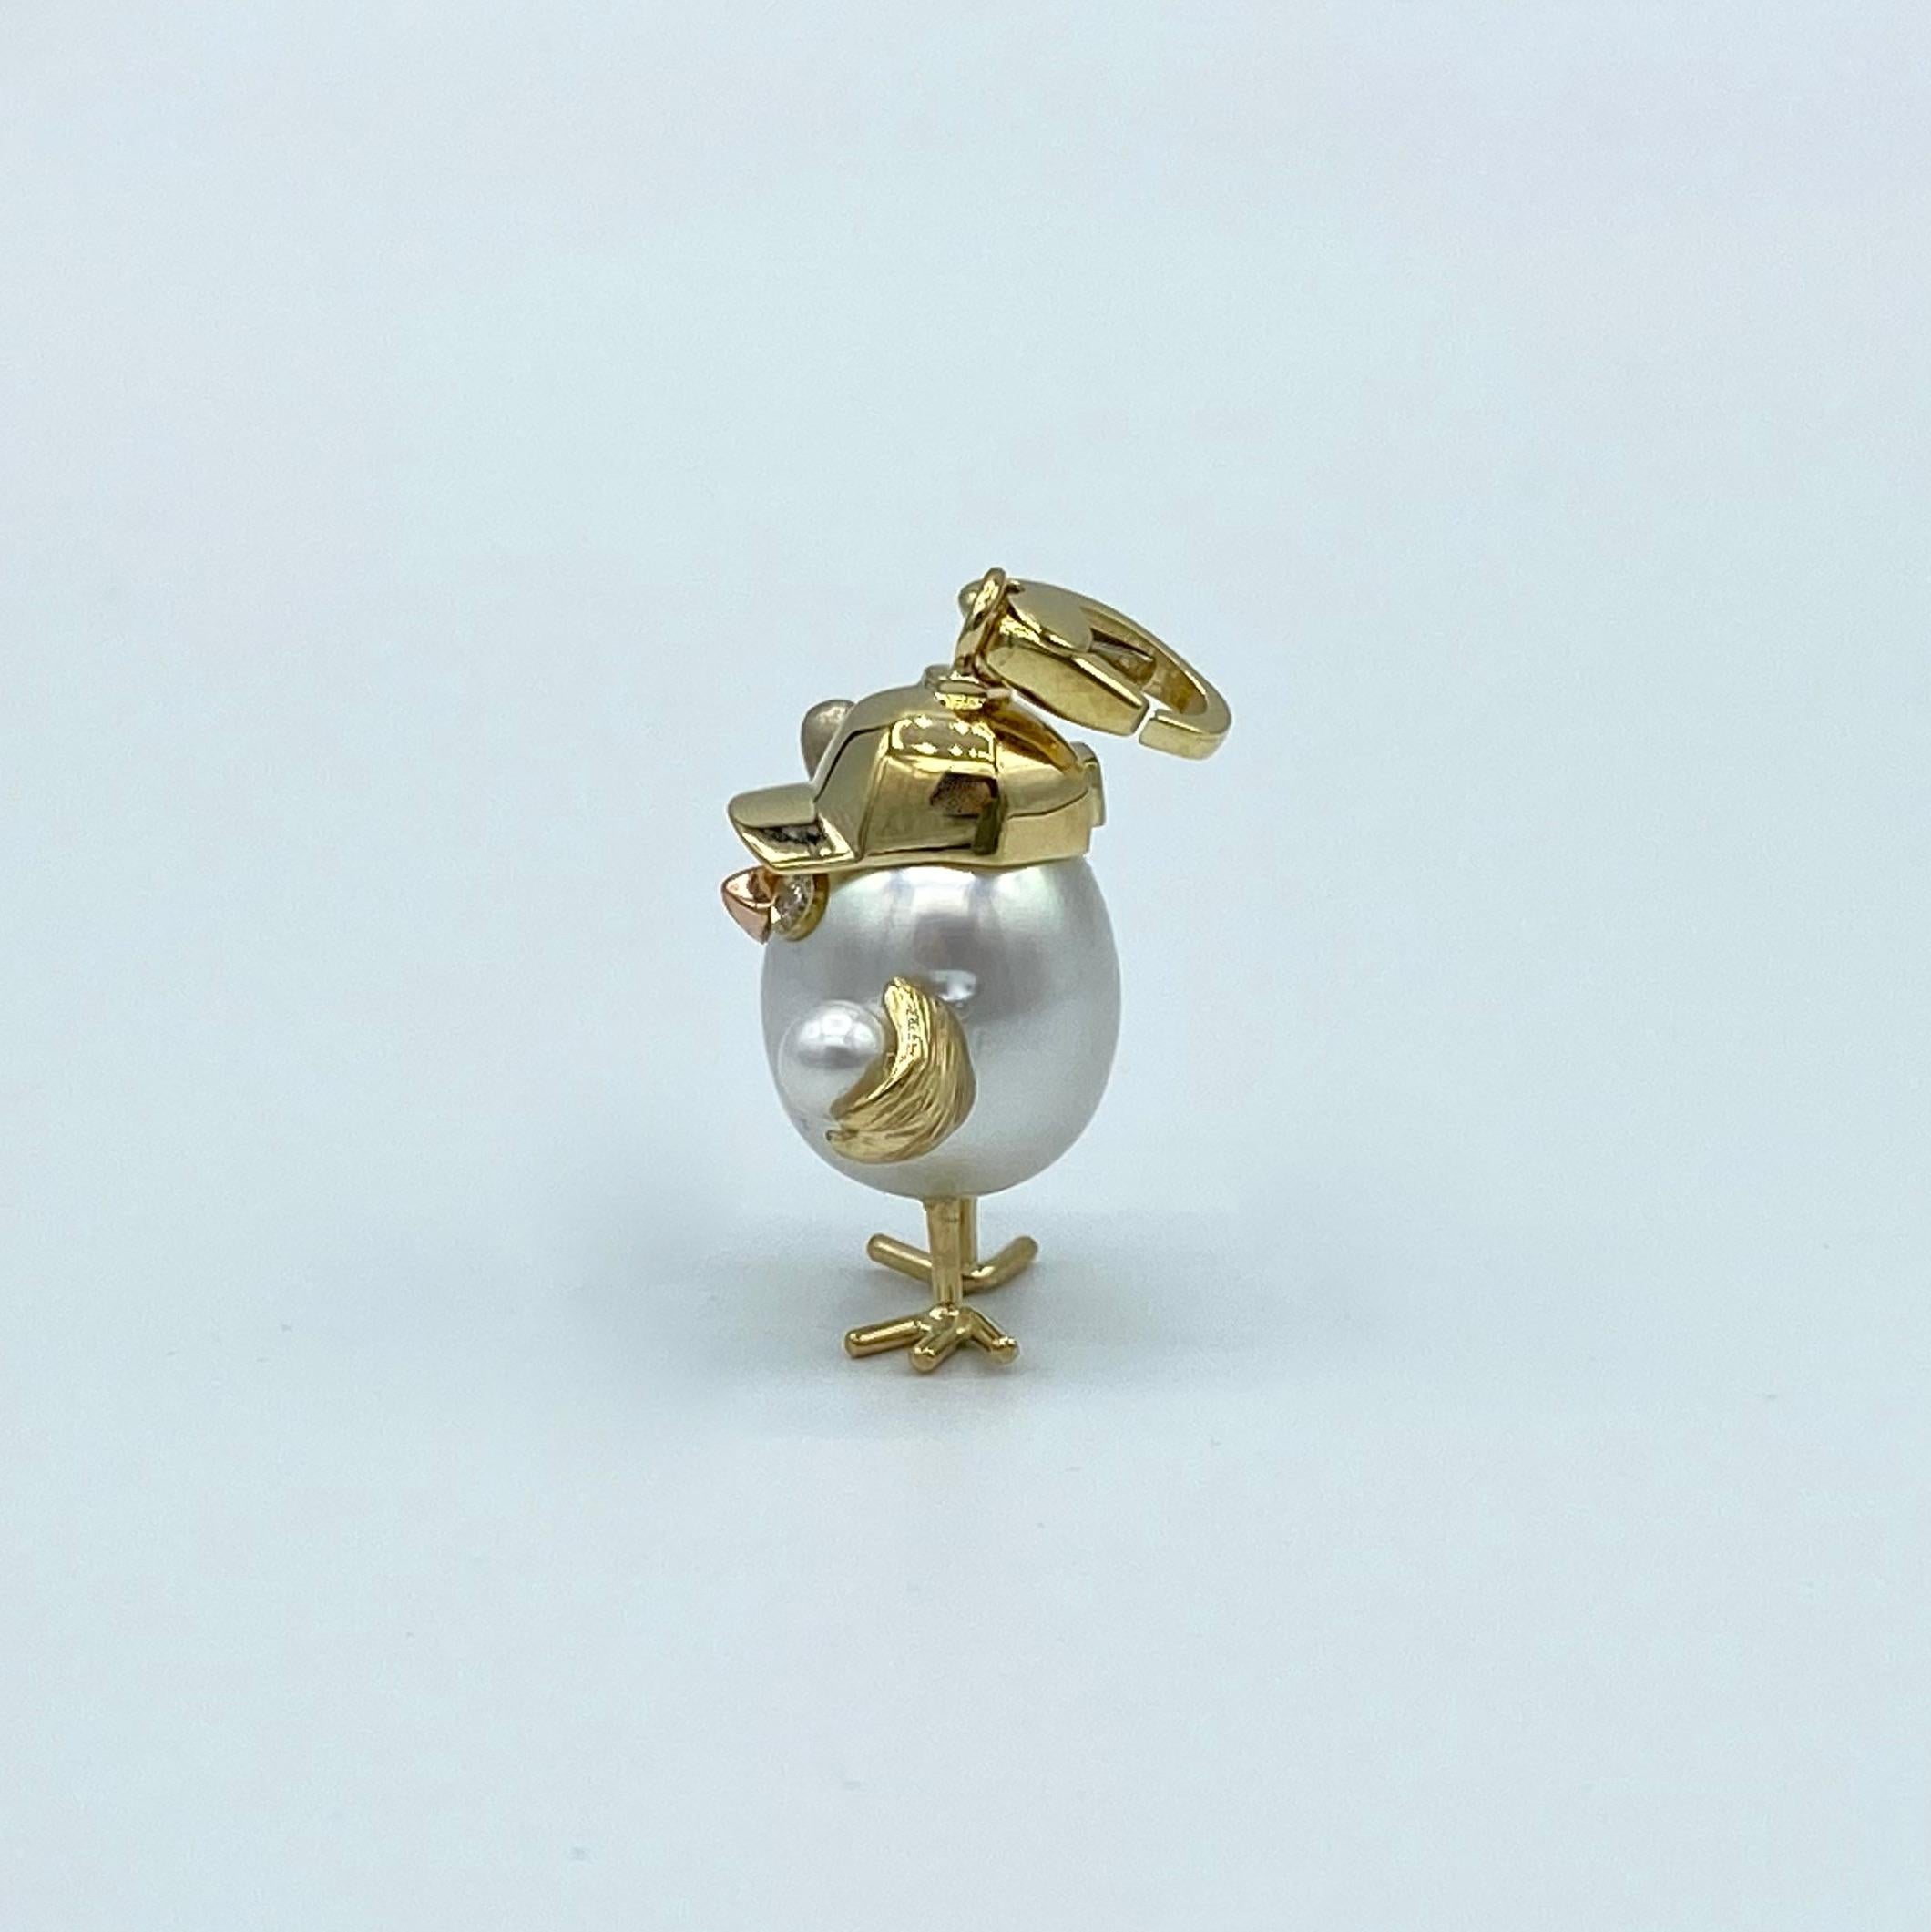 I find it fun to create animals with pearls. In this case the chick is a baseball player.
His hat, paws and wings are made of yellow gold. The basball bat is in white satin gold and the beak is in red gold.
On his left paw there a ball made with a